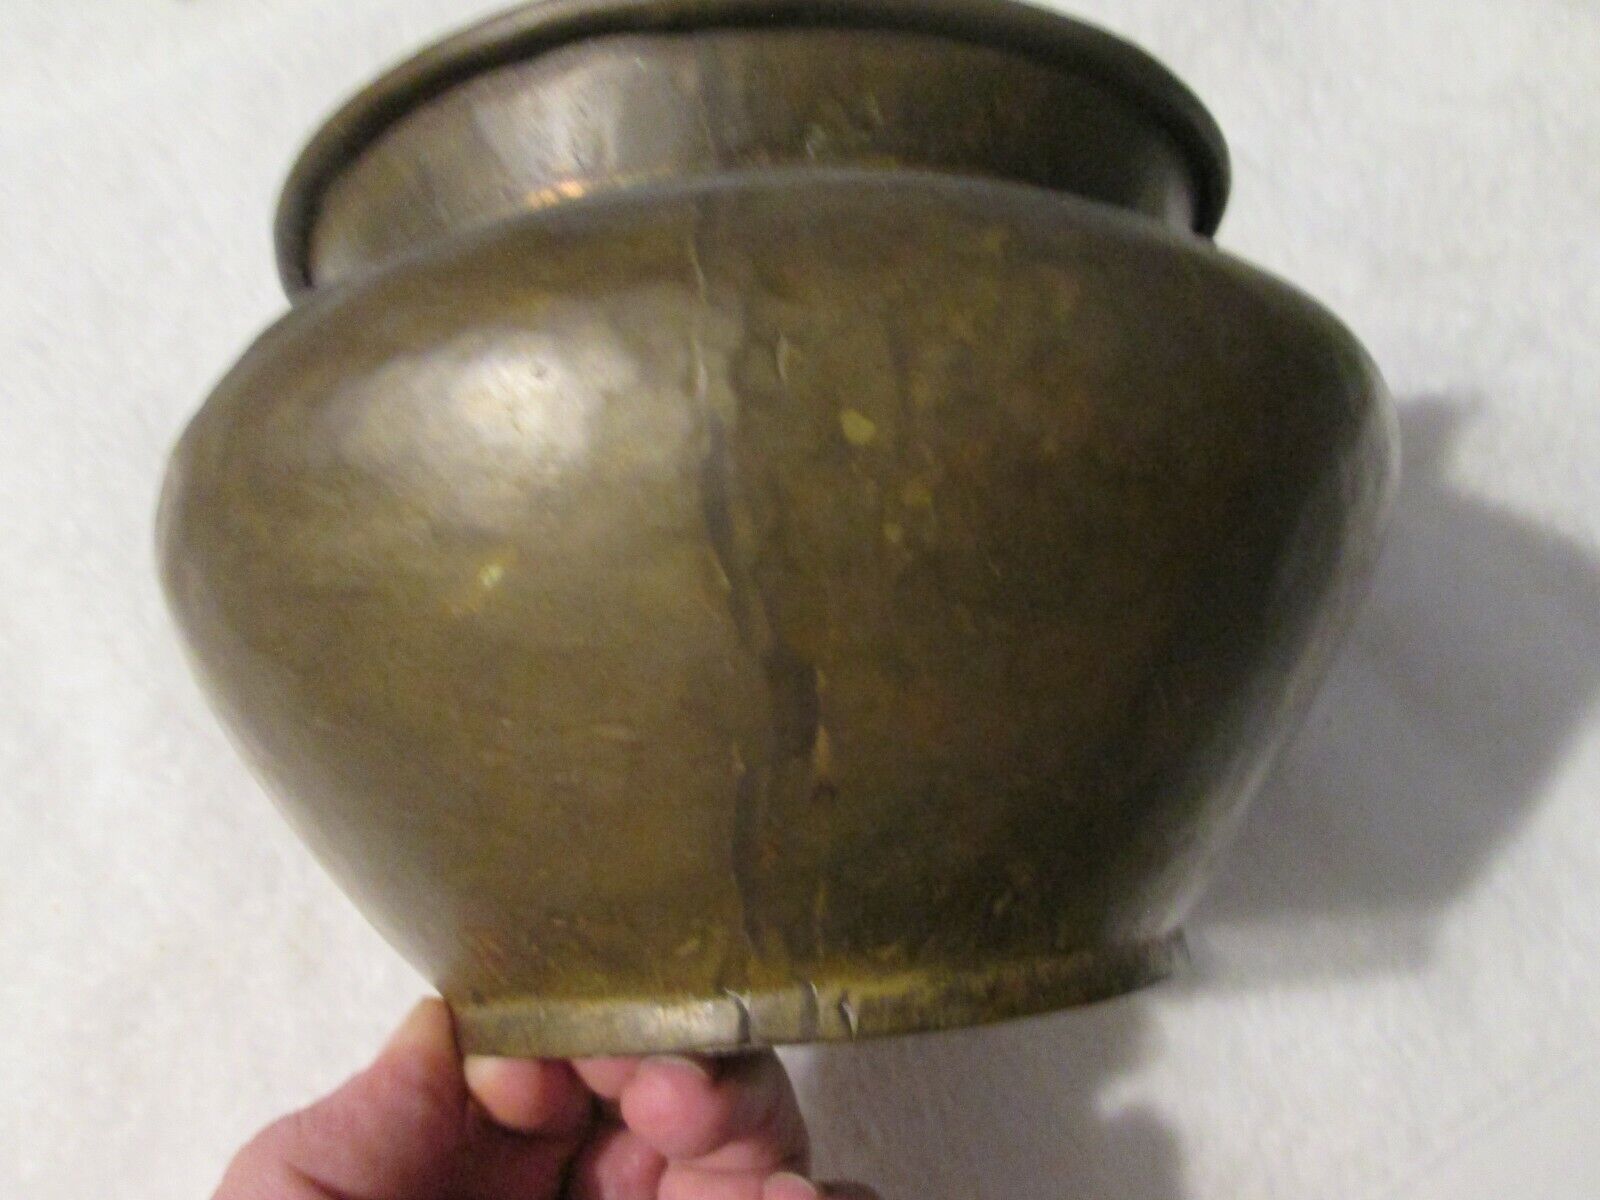 Antique Imperial Russian Dovetailed Hand Hammered Brass Pot Circa Pre 1917